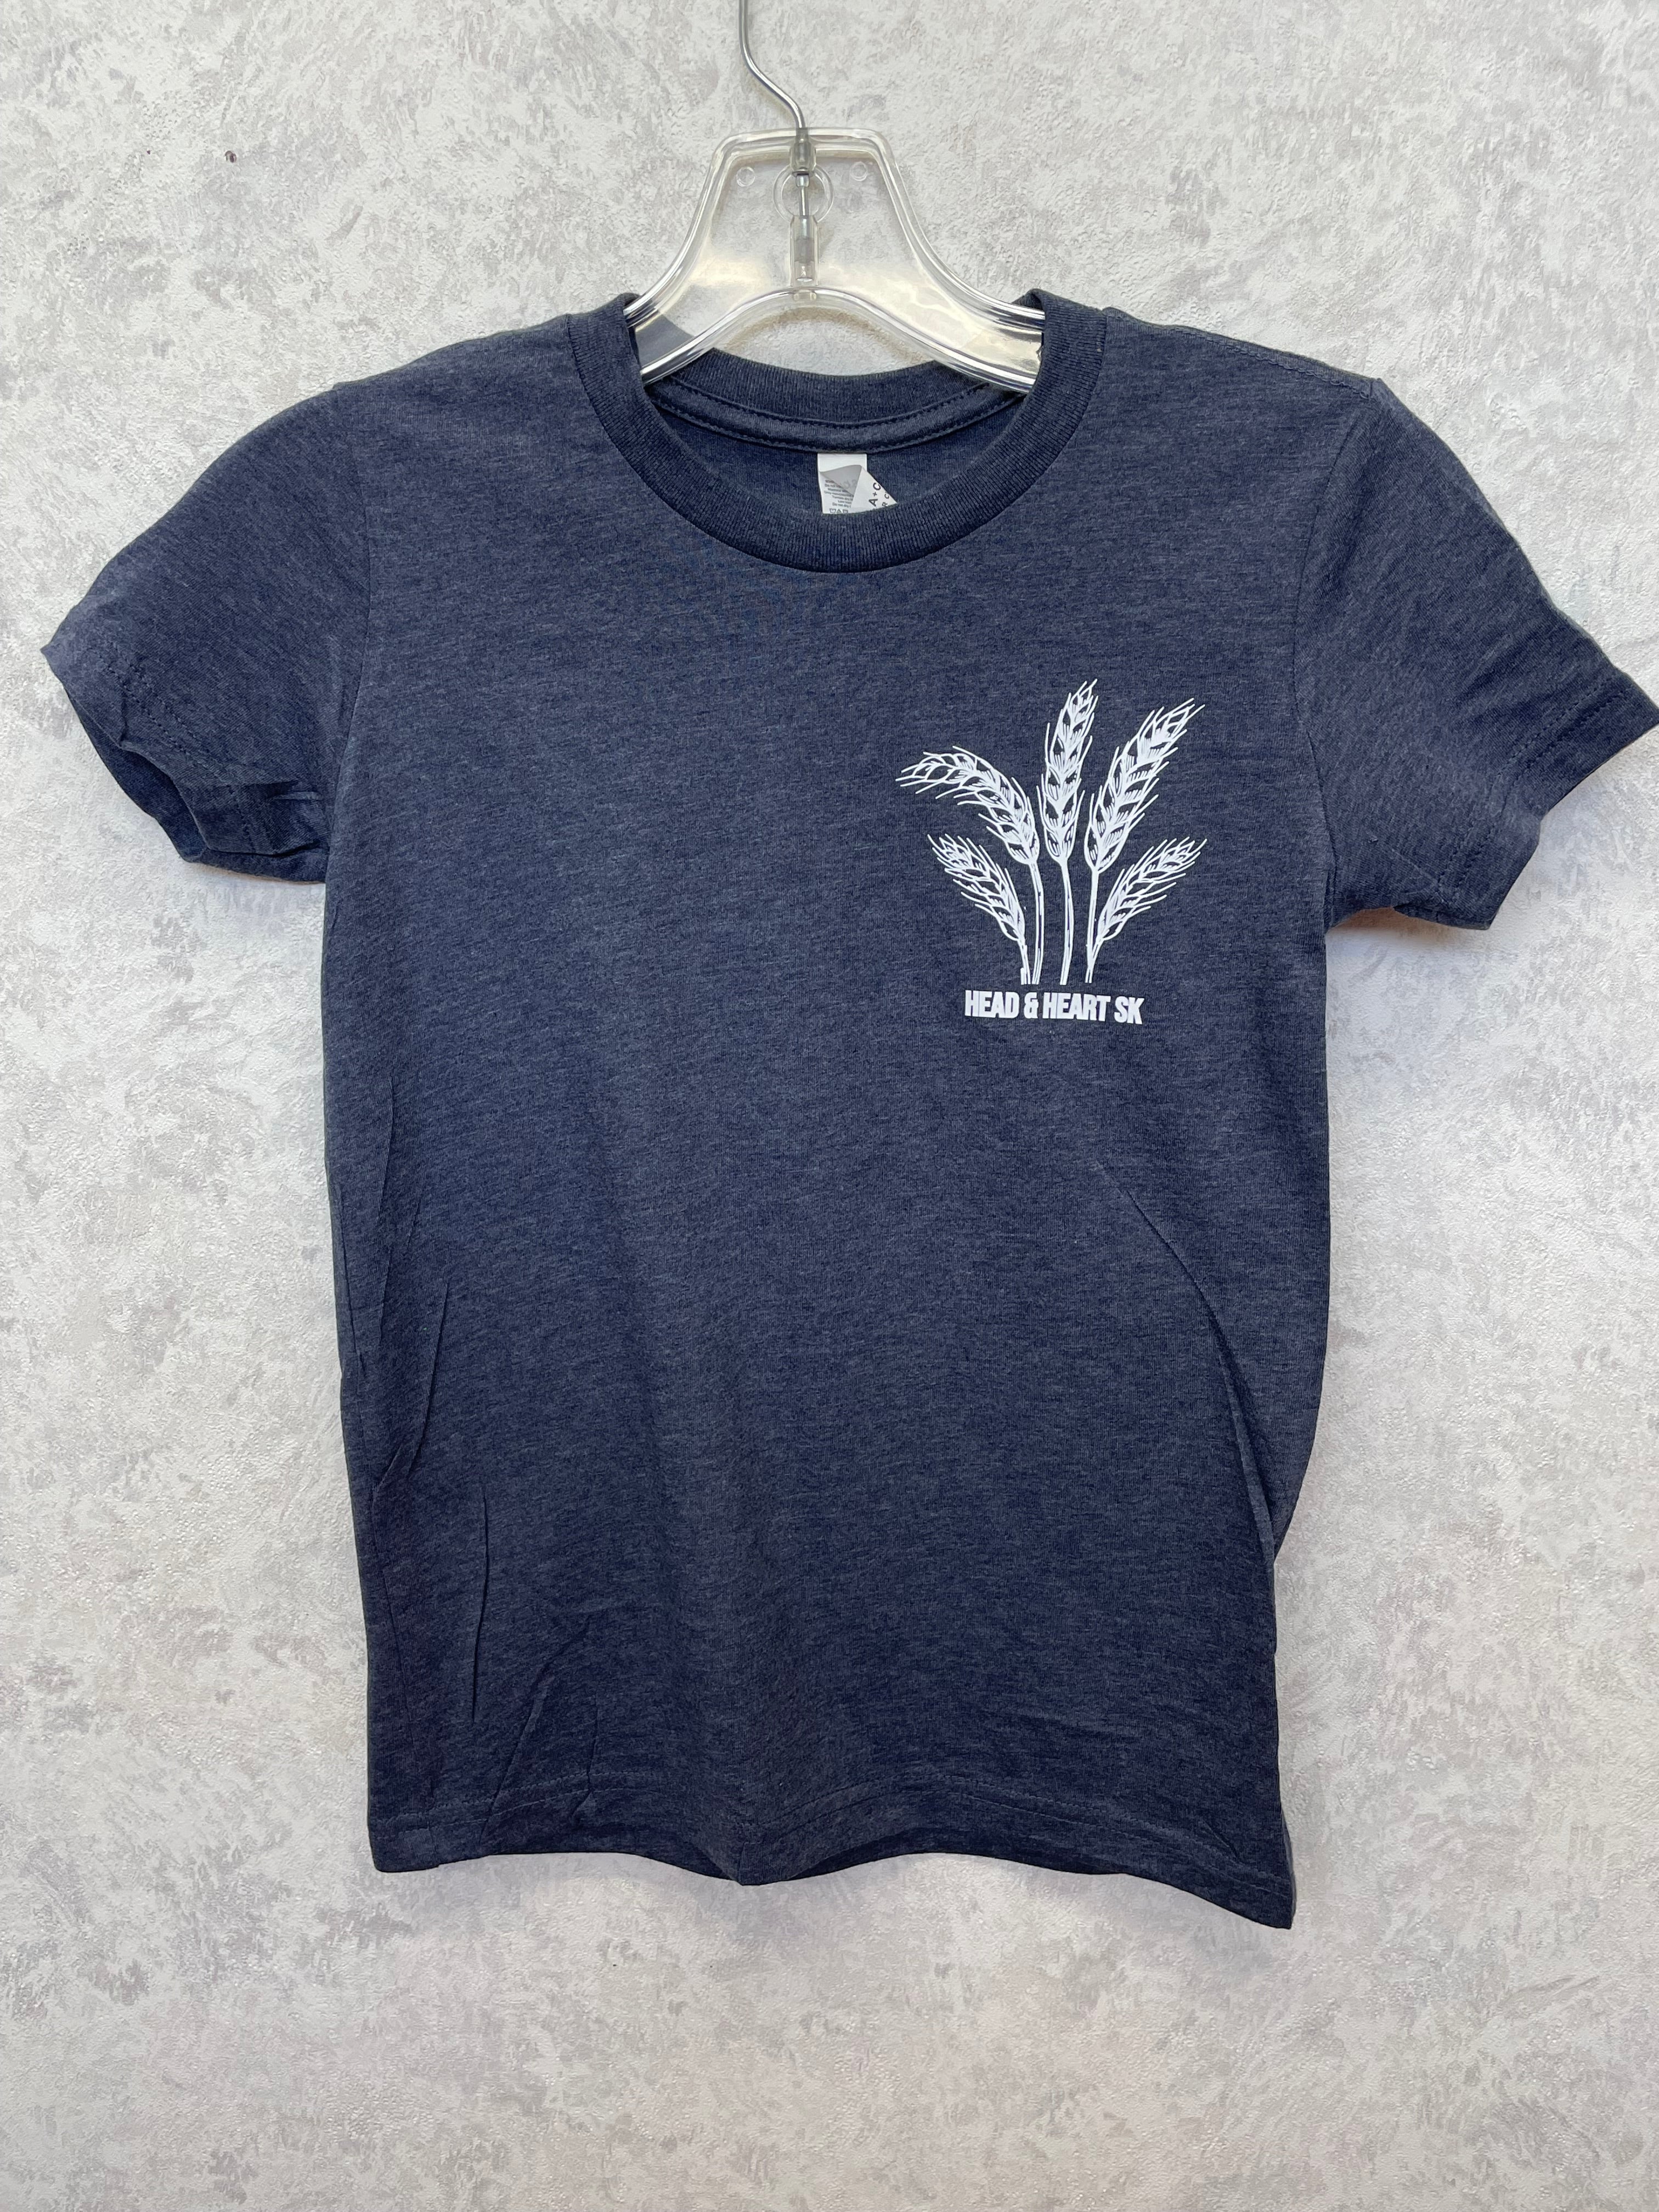 Wheat Harvest Youth T-Shirt